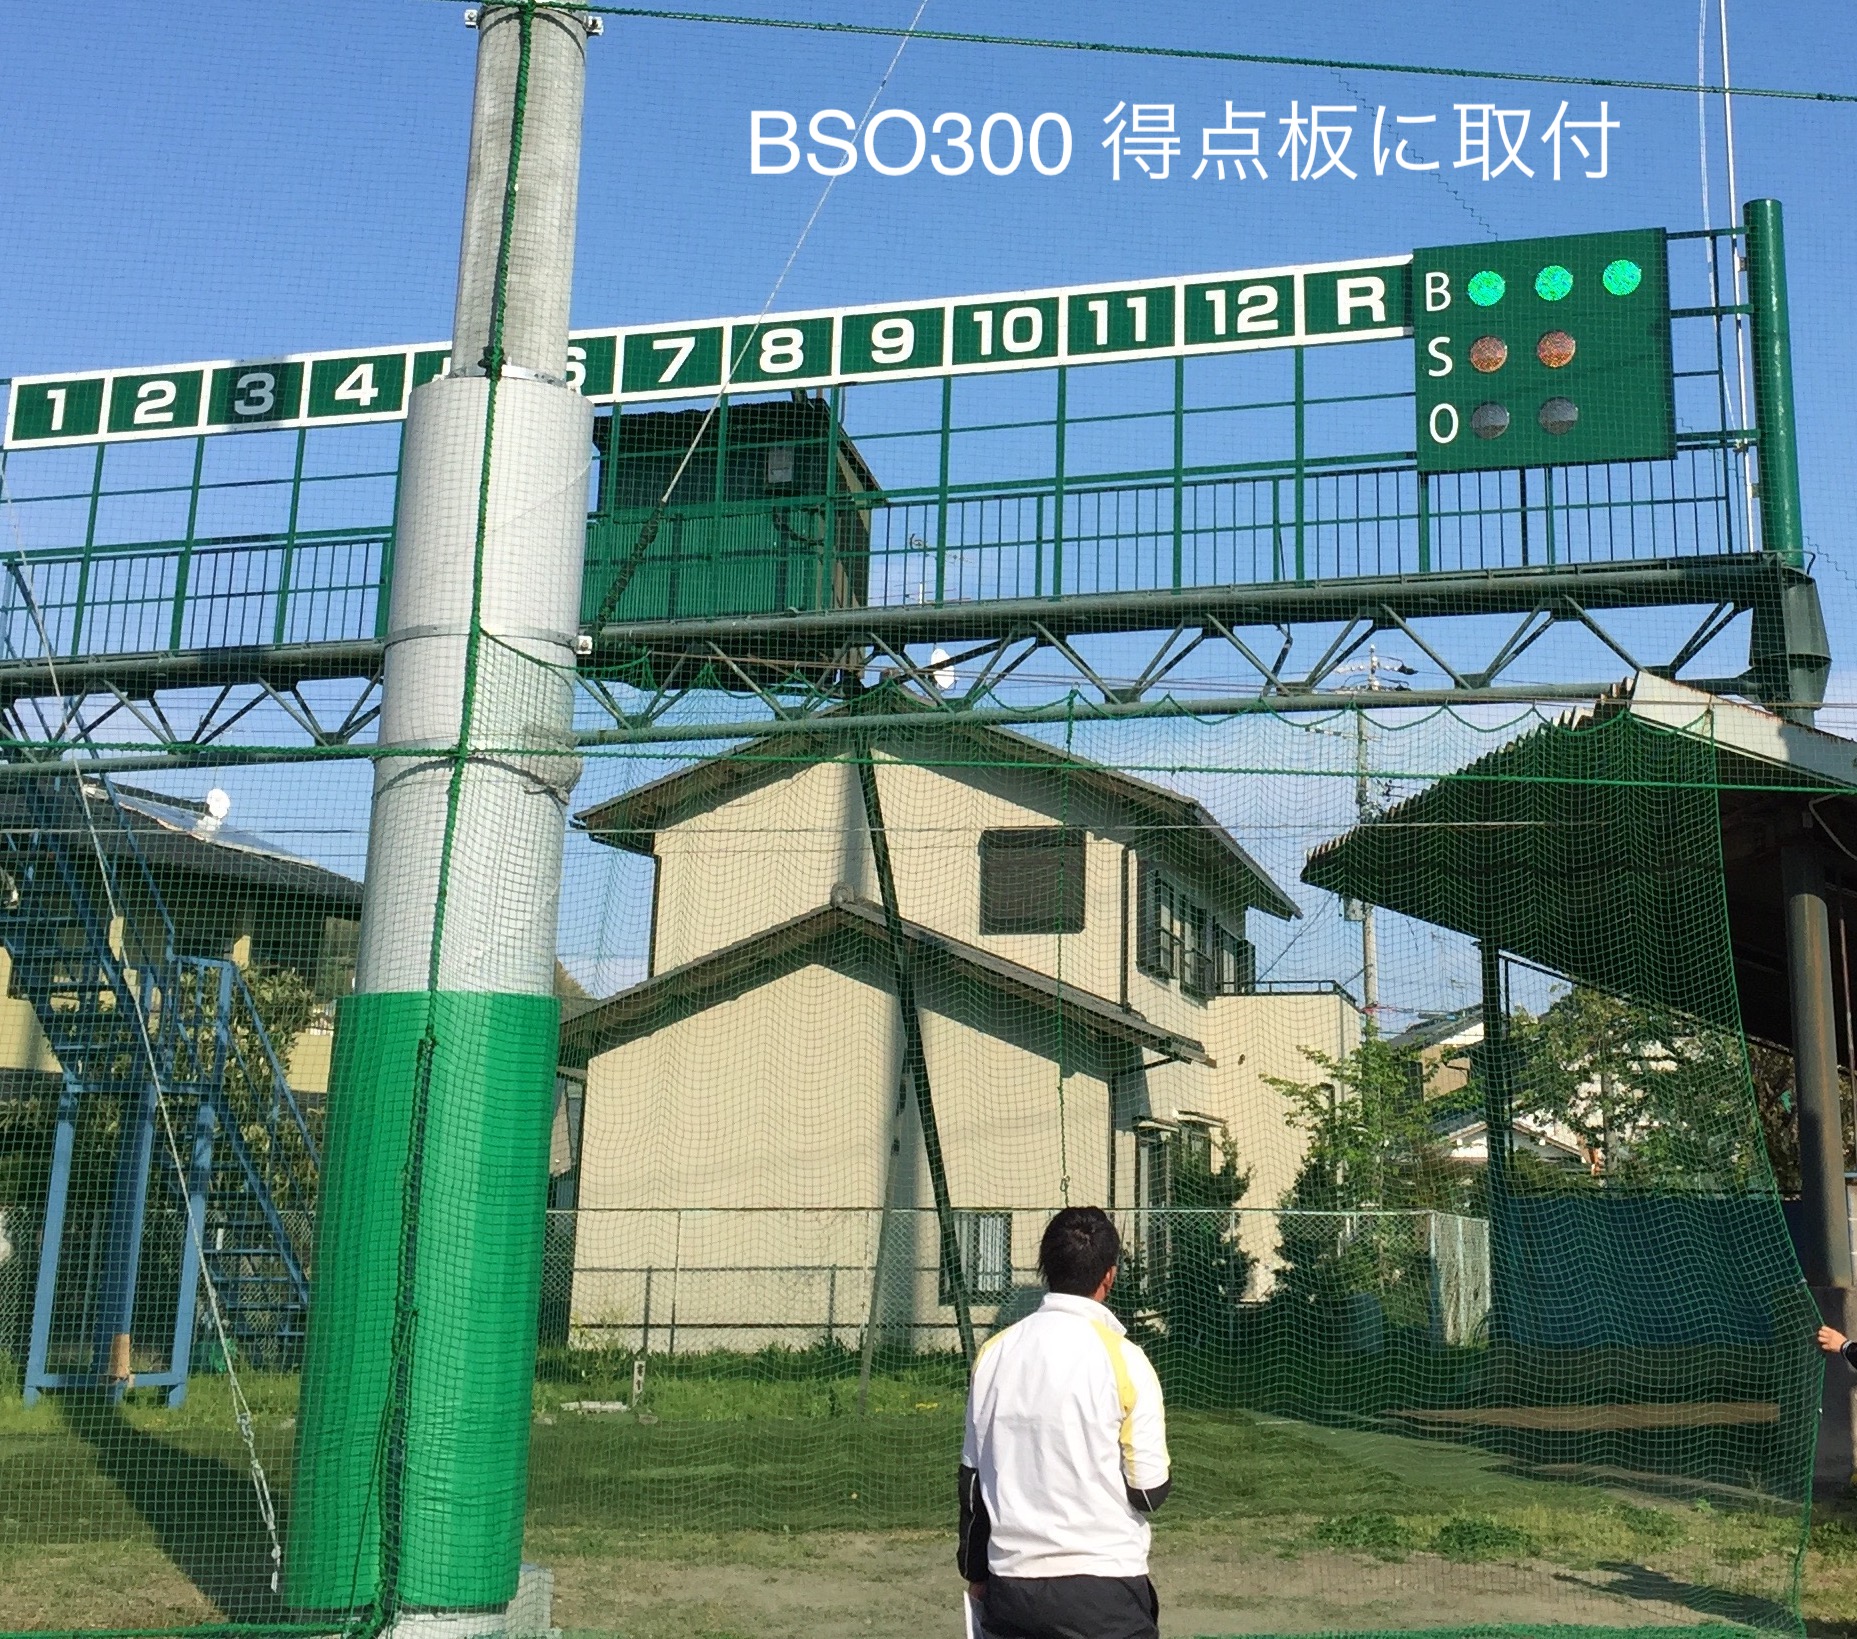 BSO300